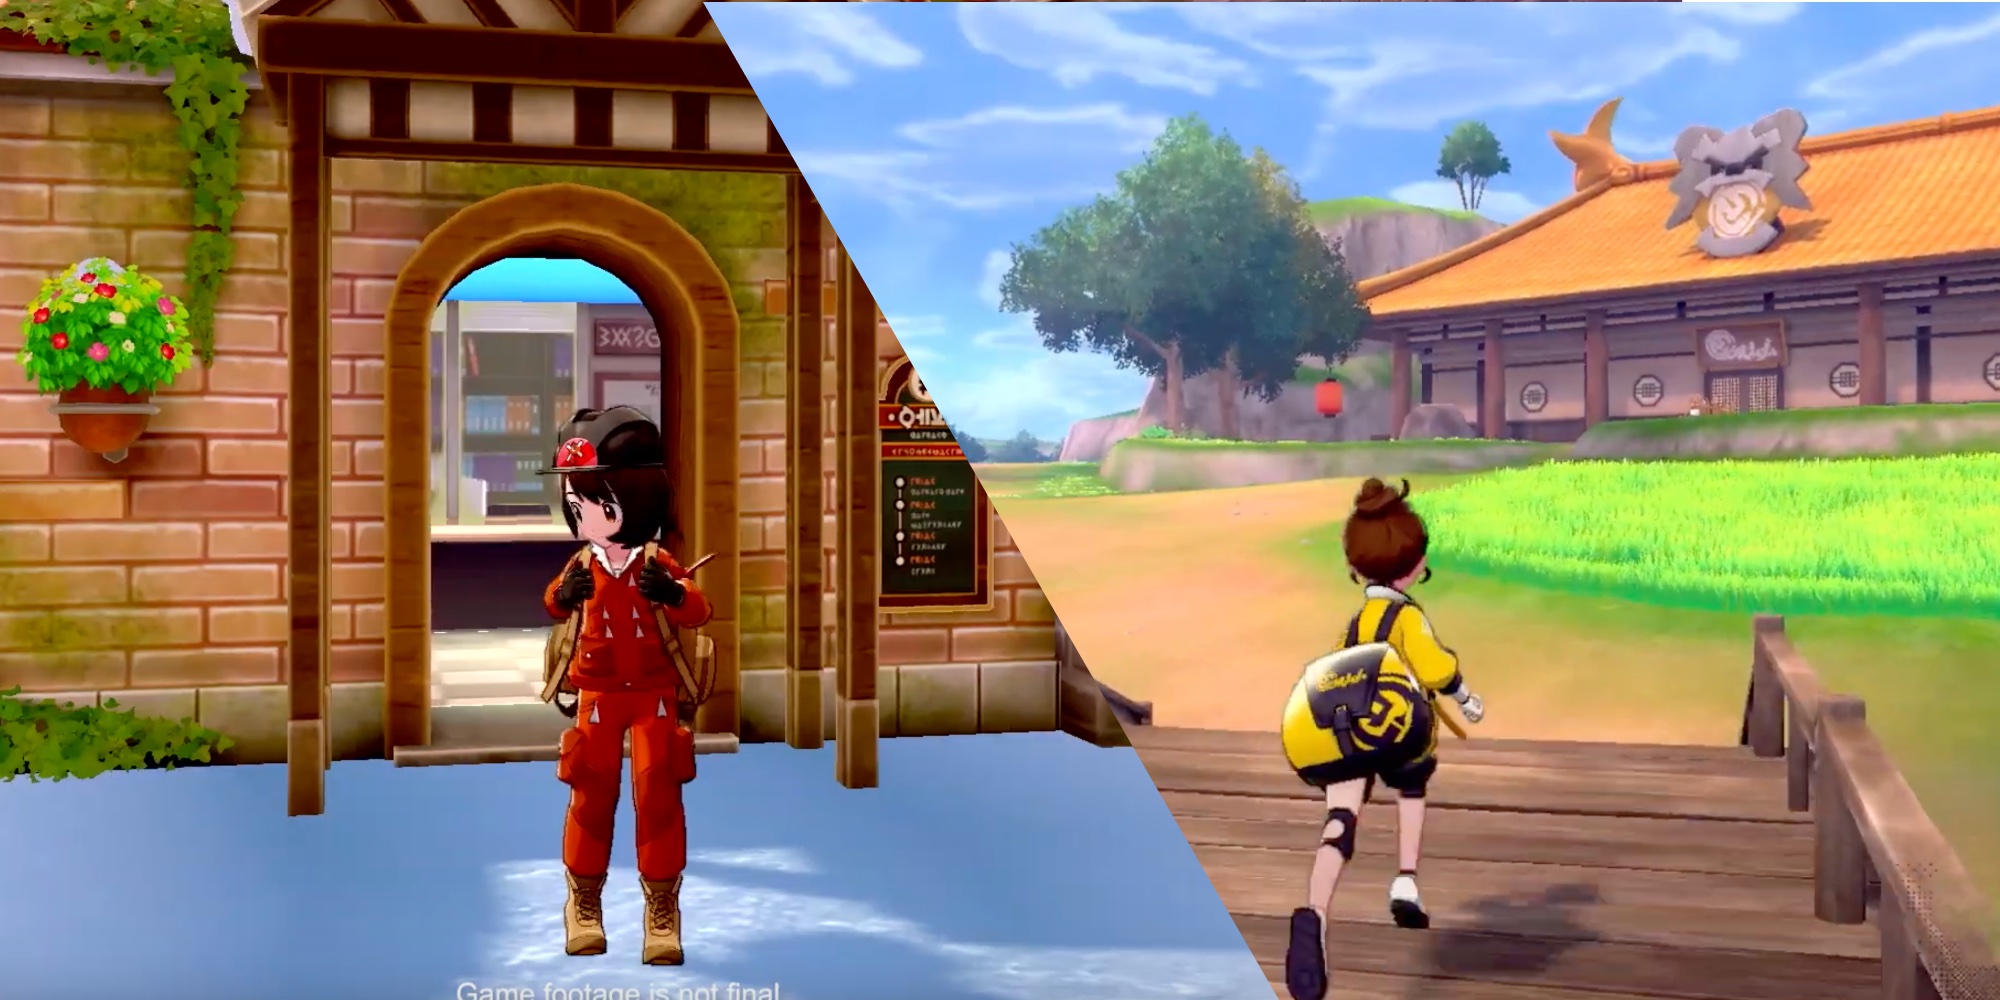 Video: Pokemon Sword & Shield The Isle of Armor DLC launches on